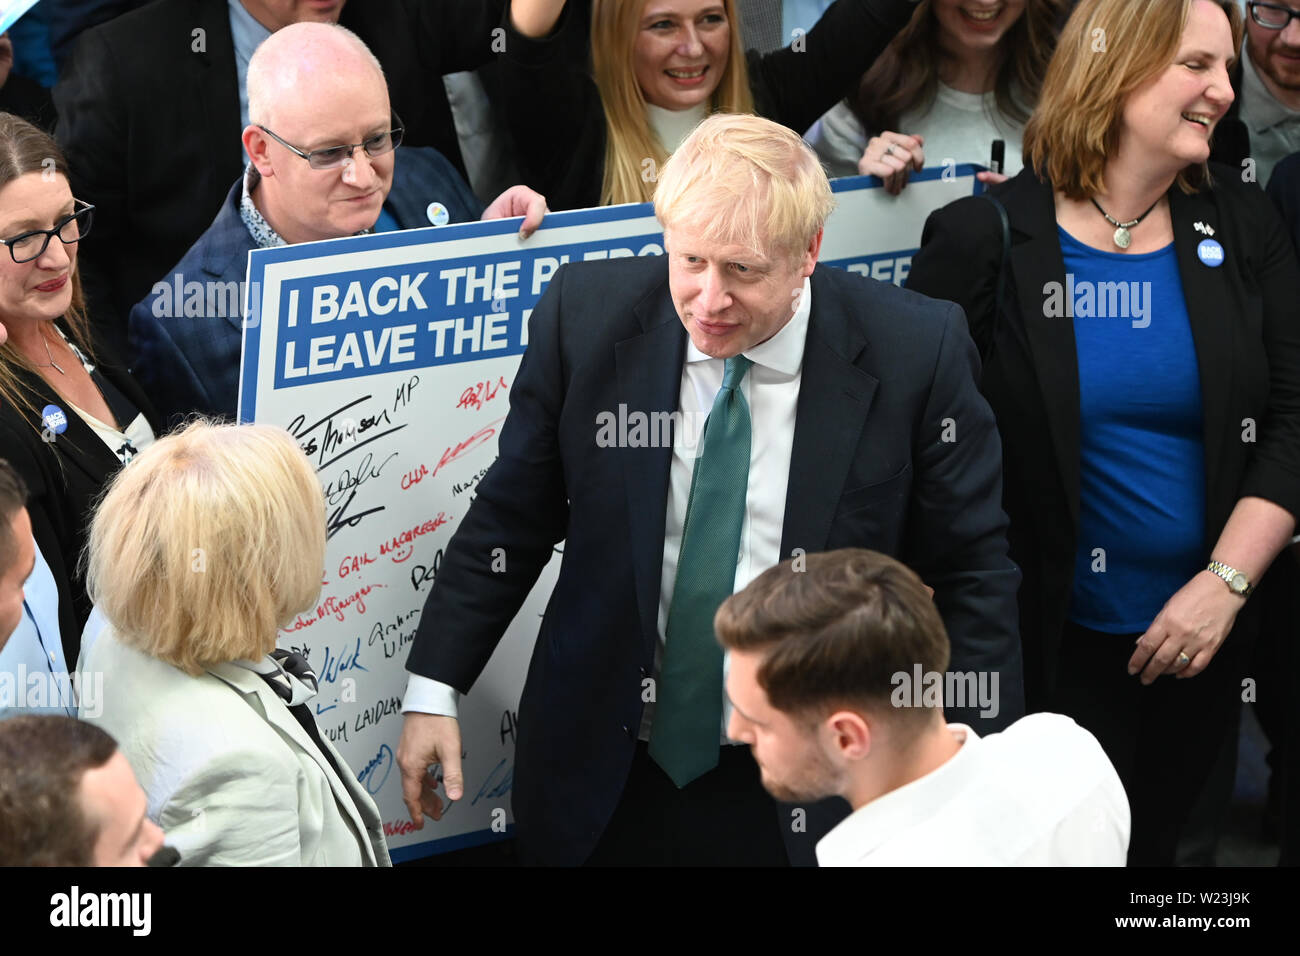 Perth, Scotland, United Kingdom. 05th July, 2019. Conservative Party leadership contender Boris Johnson arrives at Perth Concert Hall to take part in one of a series of leadership election hustings for party members around the UK. Credit: Ken Jack/Alamy Live News Stock Photo